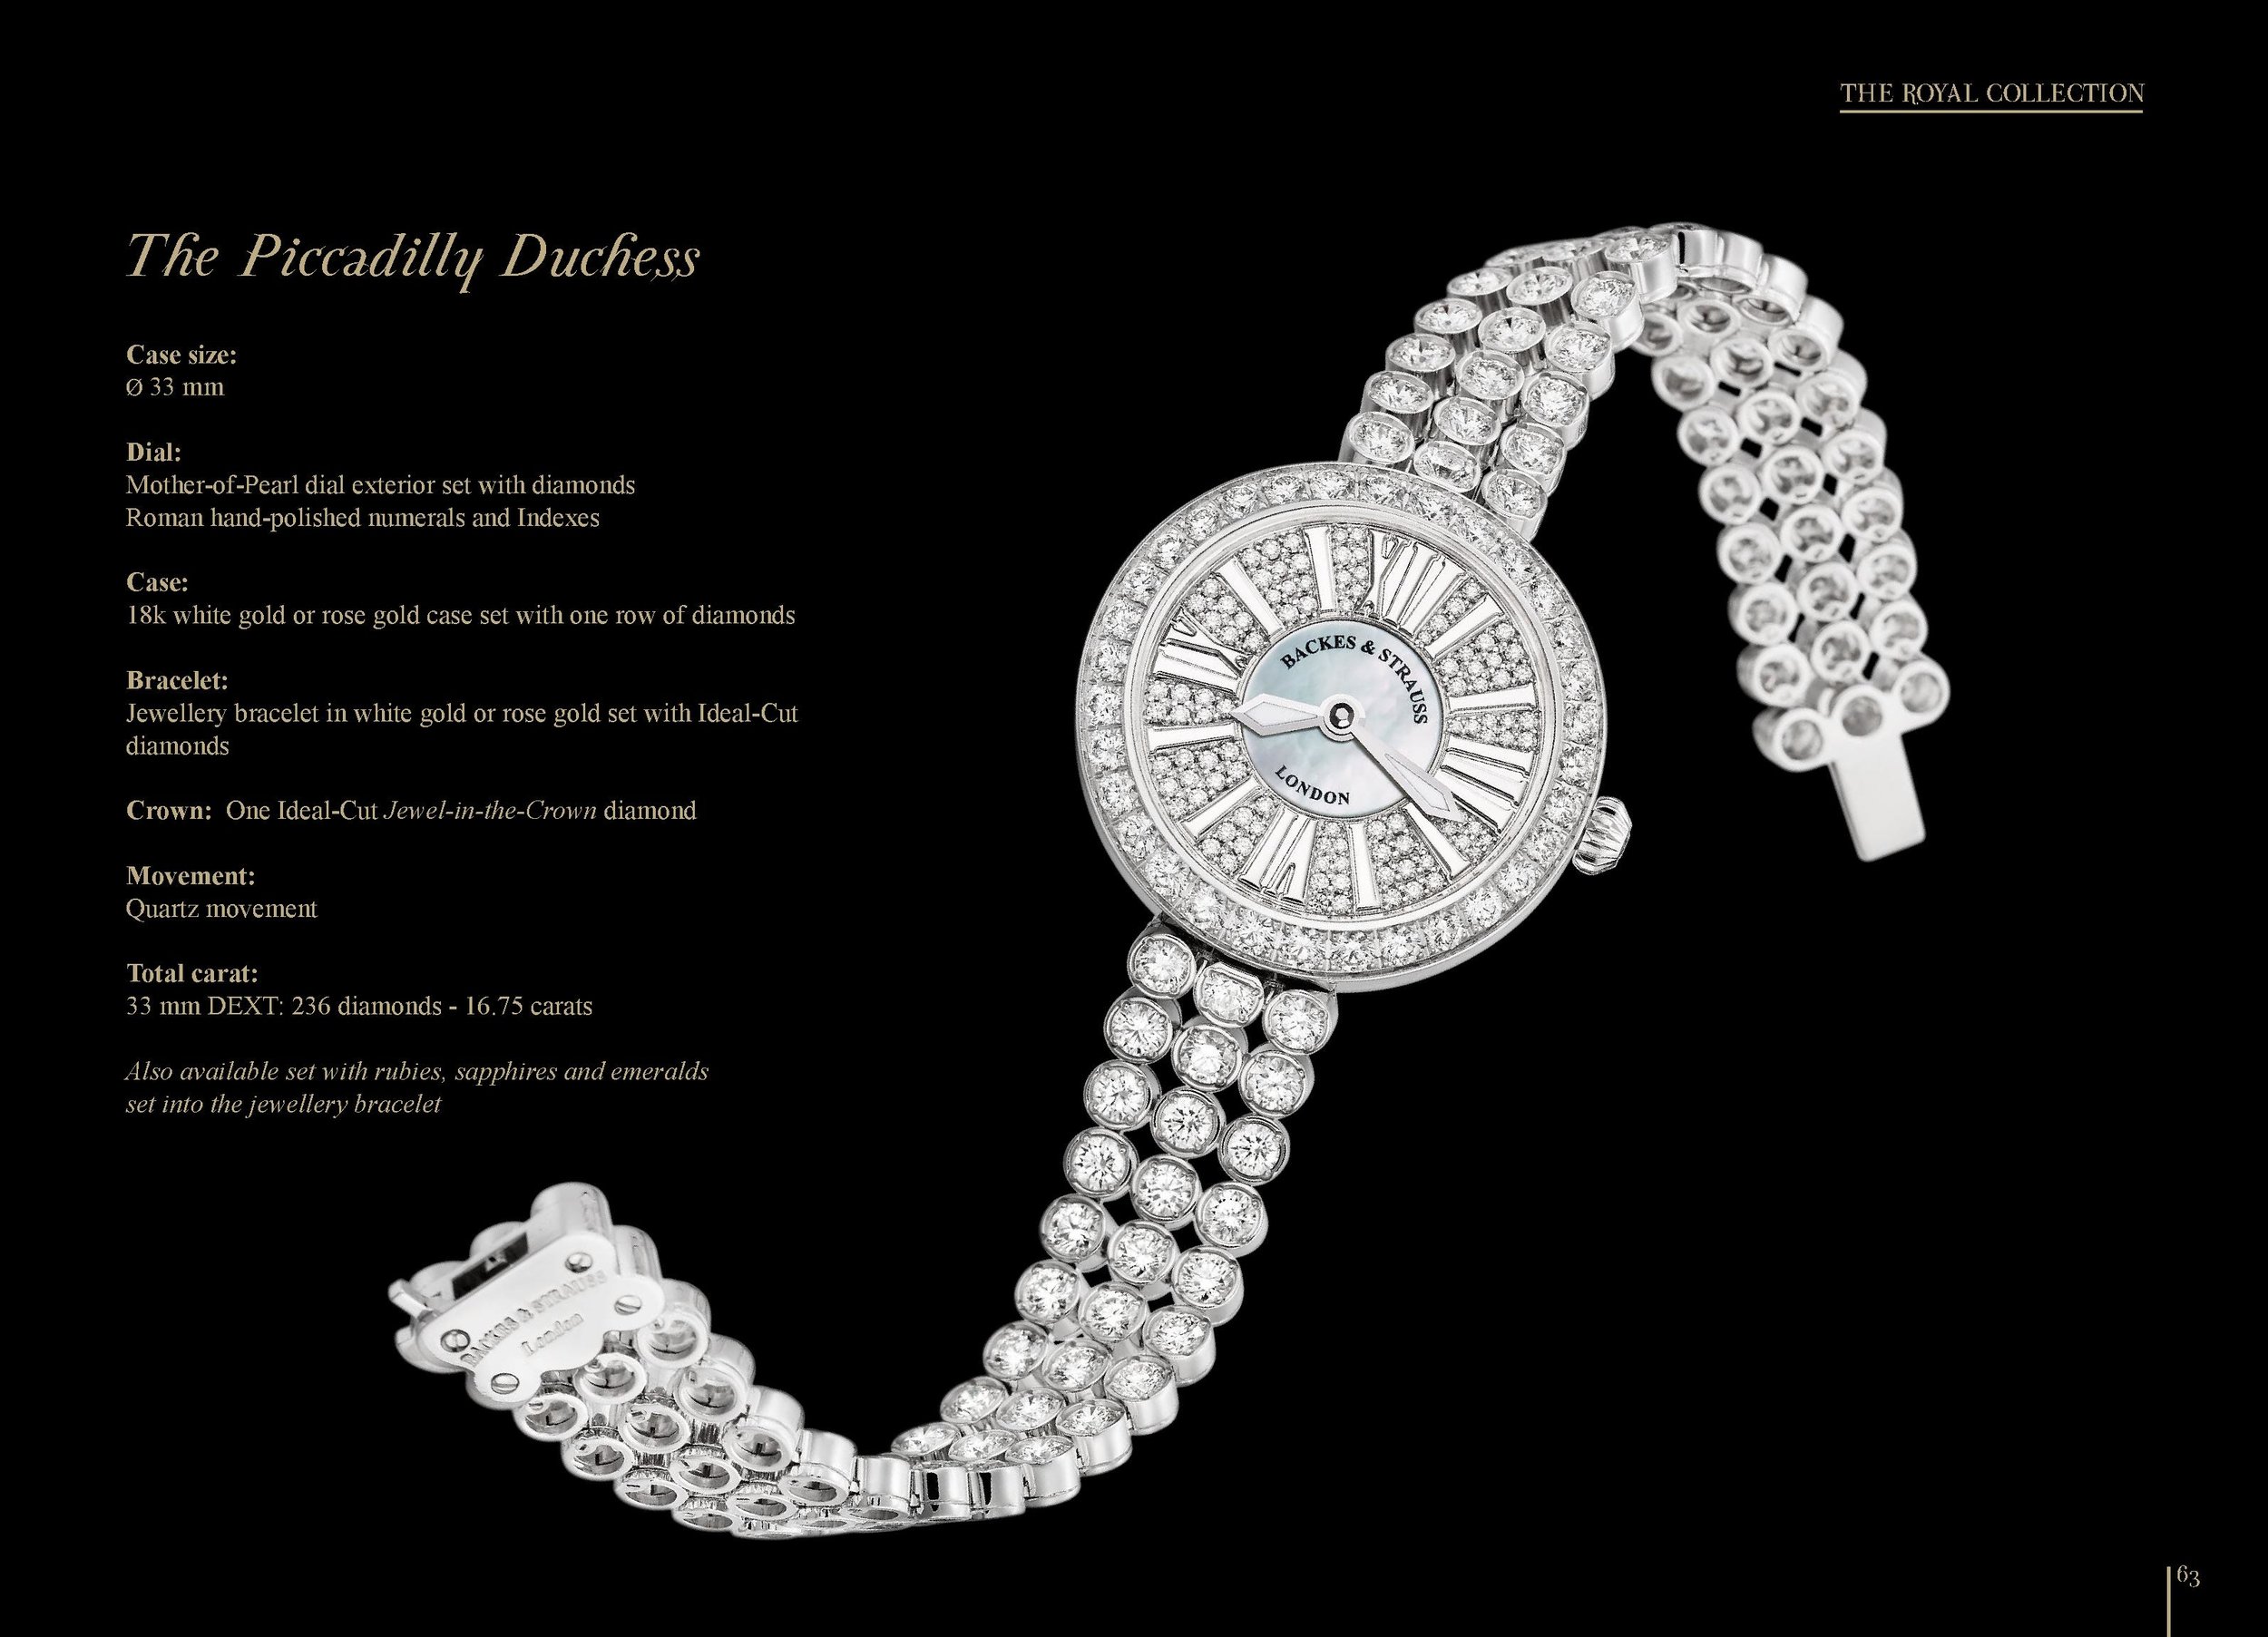 The Piccadilly Duchess iconic watch